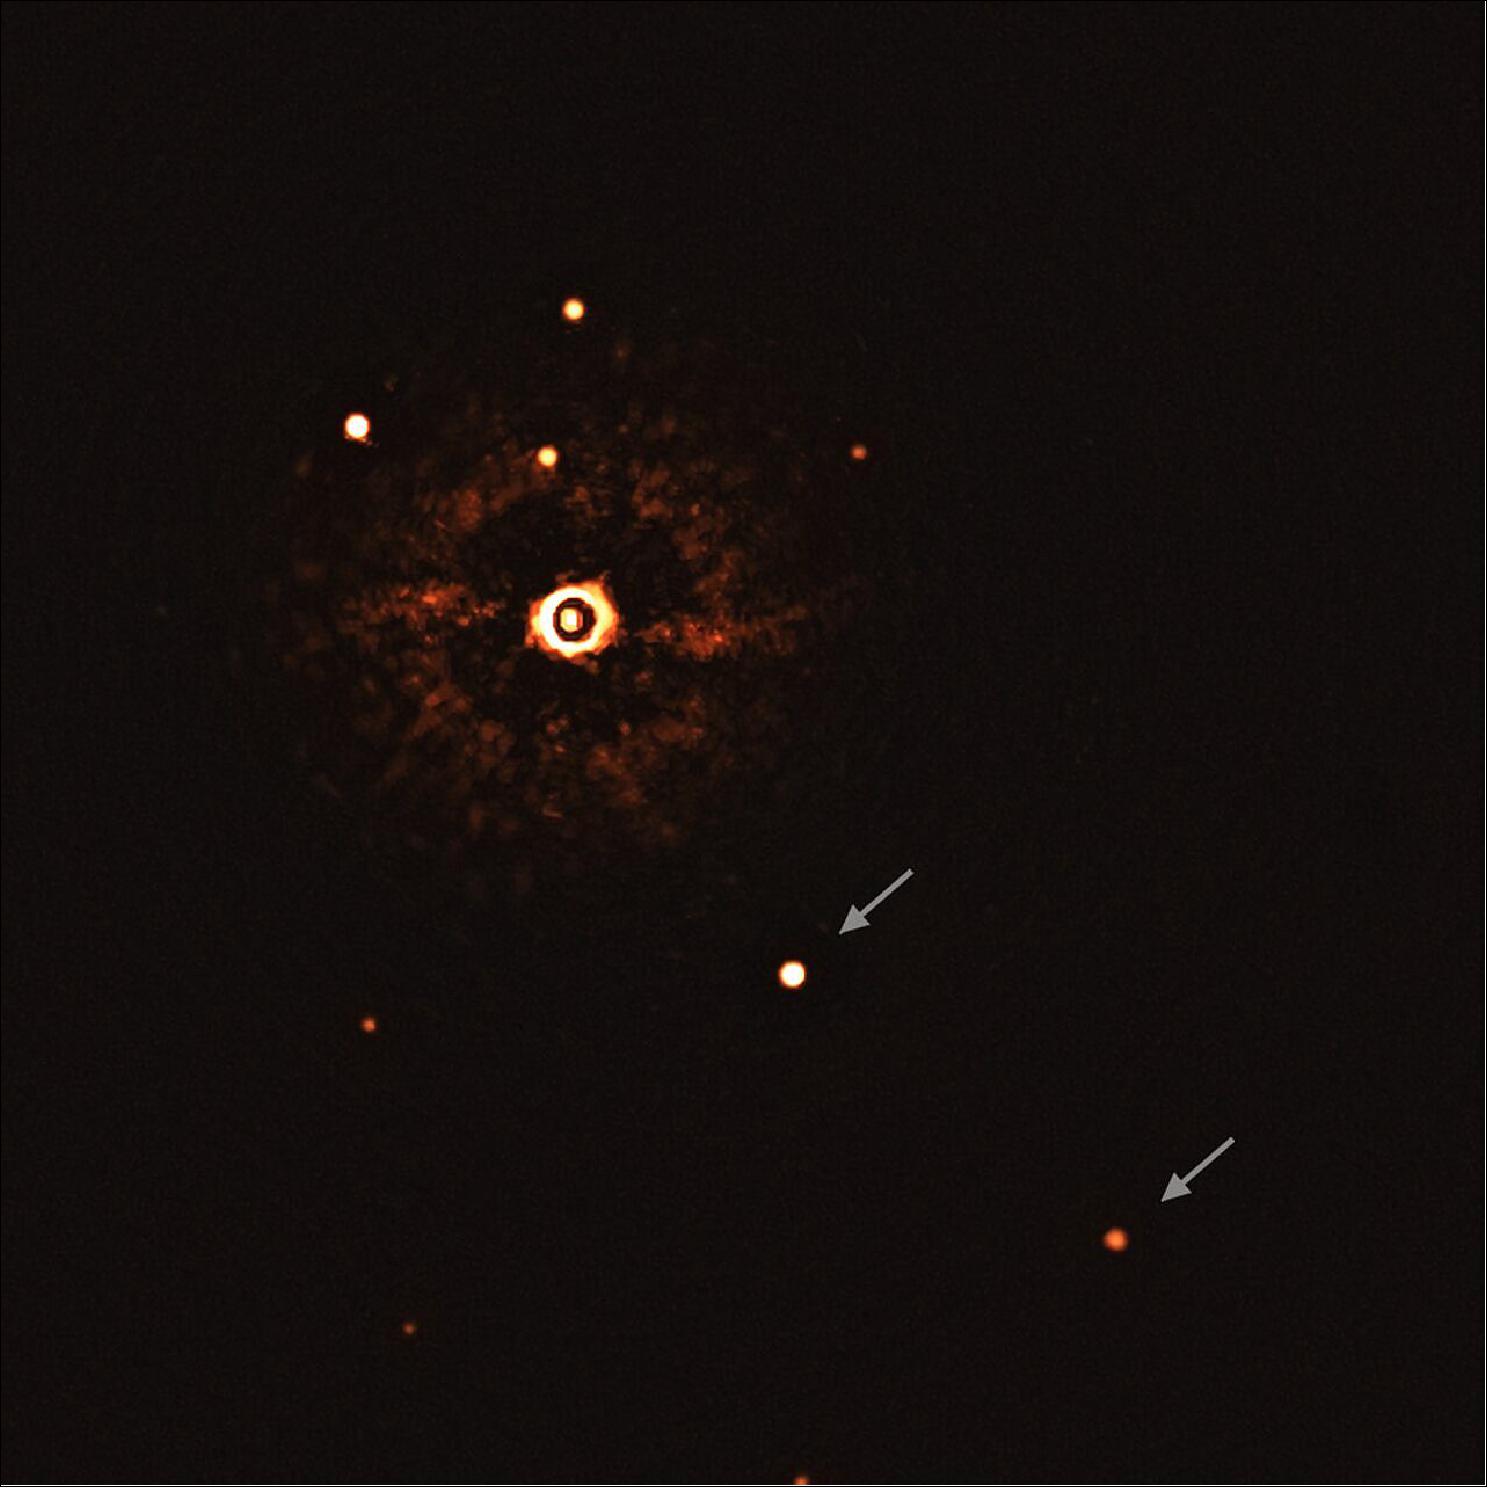 Figure 33: This image, captured by the SPHERE instrument on ESO’s Very Large Telescope, shows the star TYC 8998-760-1 accompanied by two giant exoplanets, TYC 8998-760-1b and TYC 8998-760-1c. This is the first time astronomers have directly observed more than one planet orbiting a star similar to the Sun. The two planets are visible as two bright dots in the center (TYC 8998-760-1b) and bottom right (TYC 8998-760-1c) of the frame. Other bright dots, which are background stars, are visible in the image as well. By taking different images at different times, the team were able to distinguish these planets from the background stars. The image was captured by blocking the light from the young, Sun-like star (top-left of center) using a coronagraph, which allows for the fainter planets to be detected. The bright and dark rings we see on the star’s image are optical artefacts (image credit: ESO/Bohn et al.)